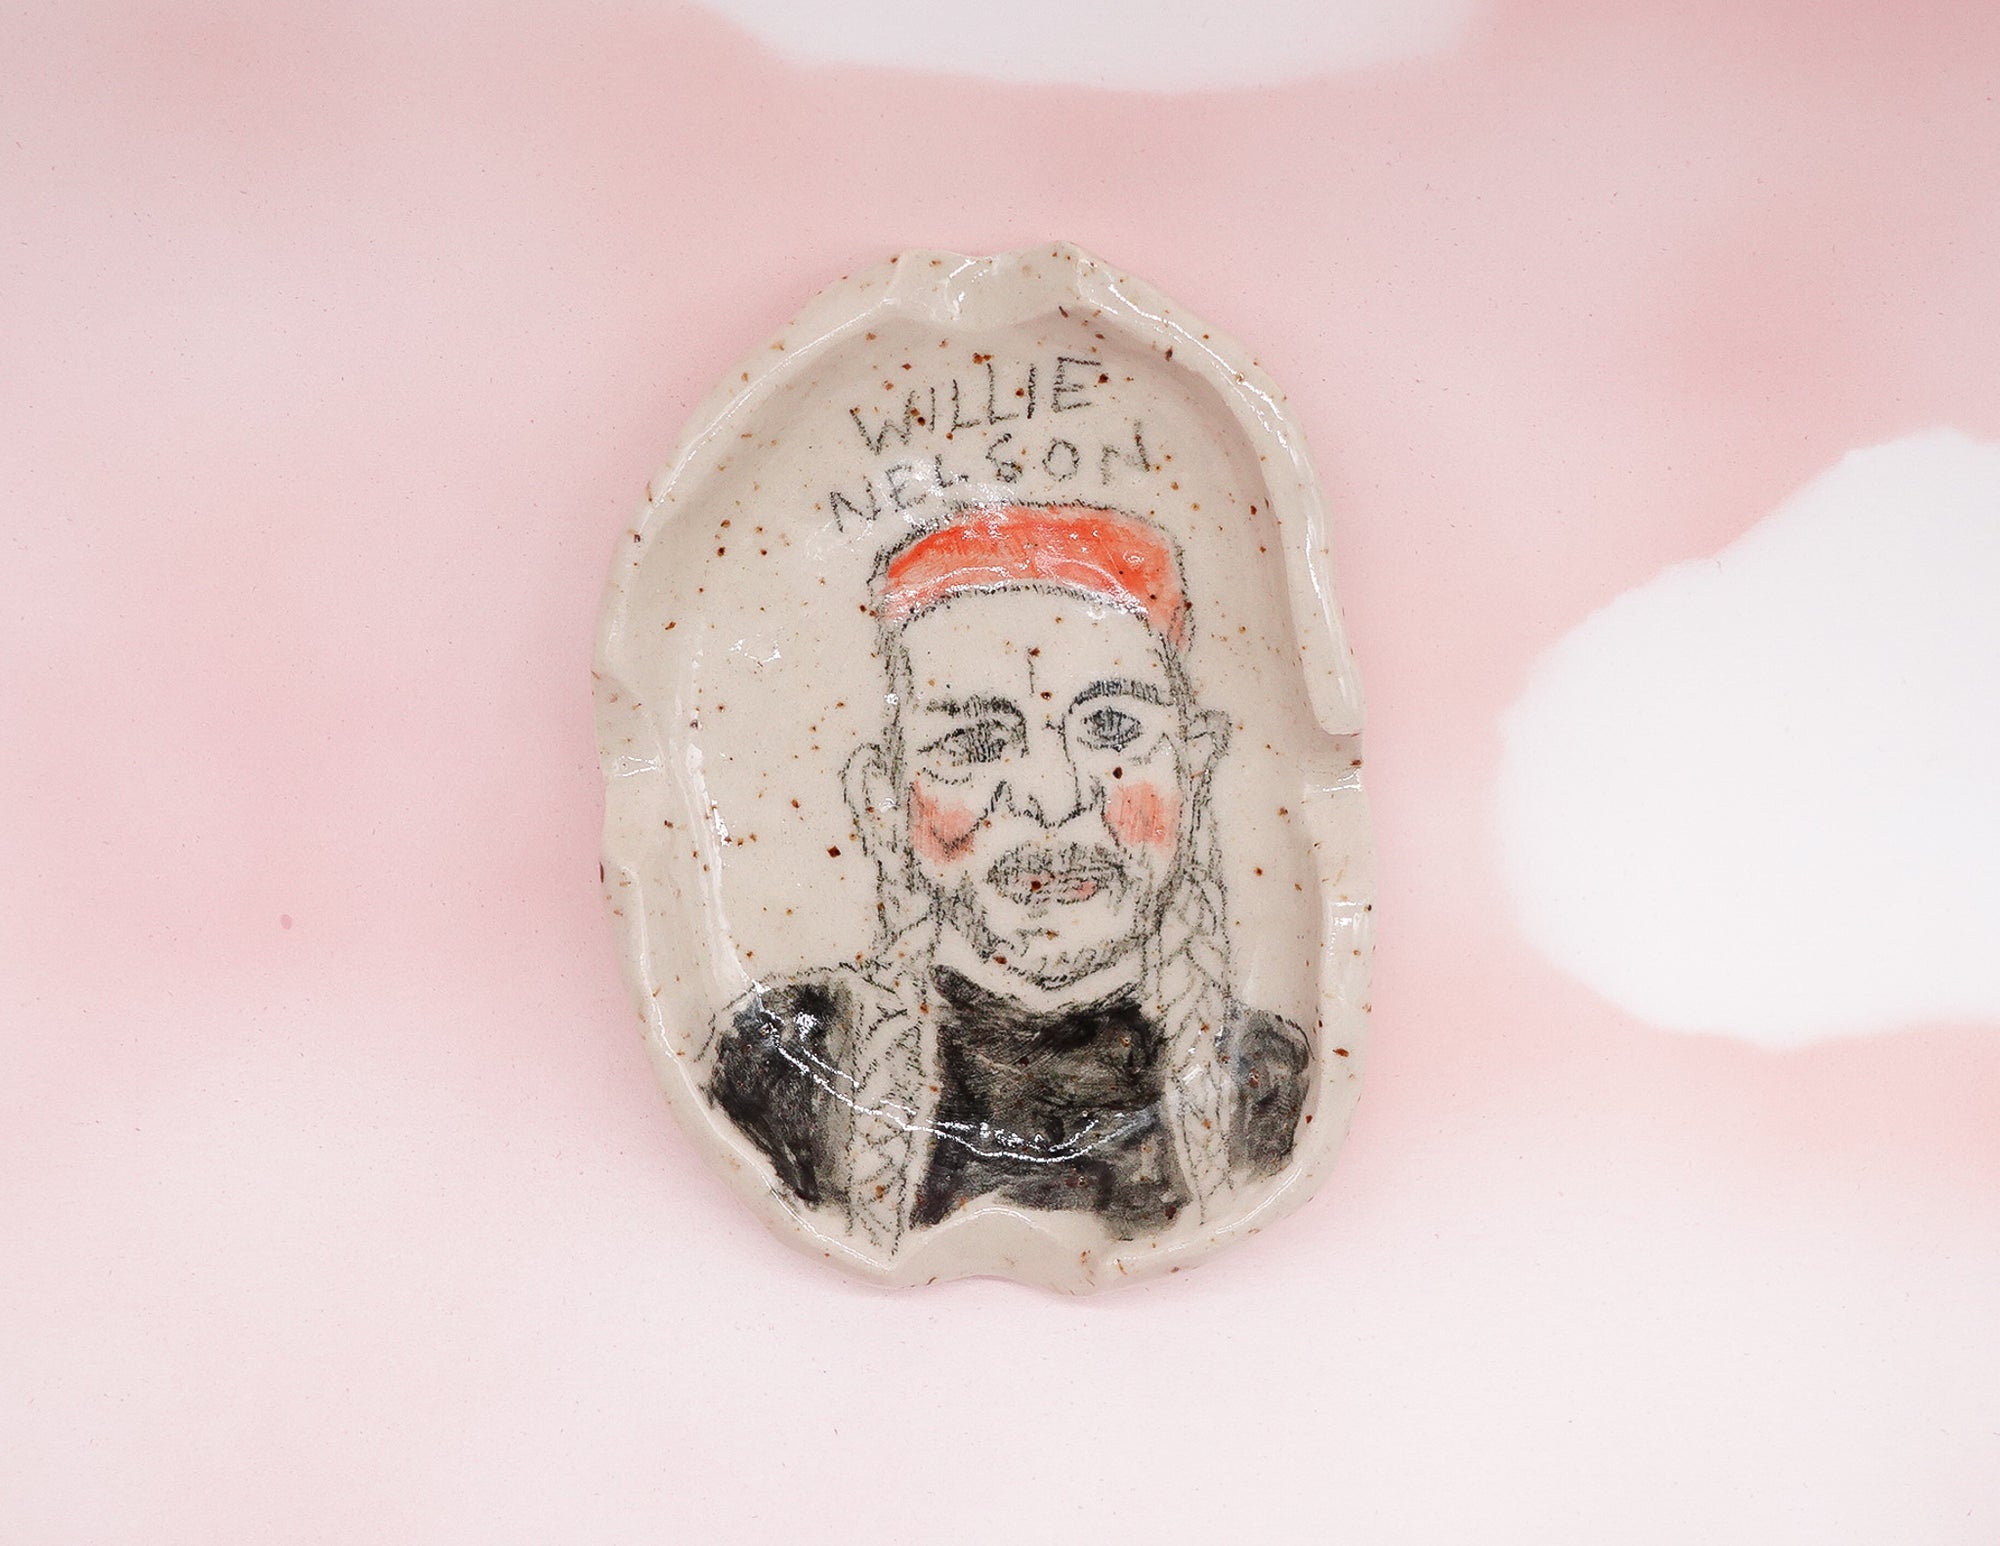 Willie Nelson Ash Tray